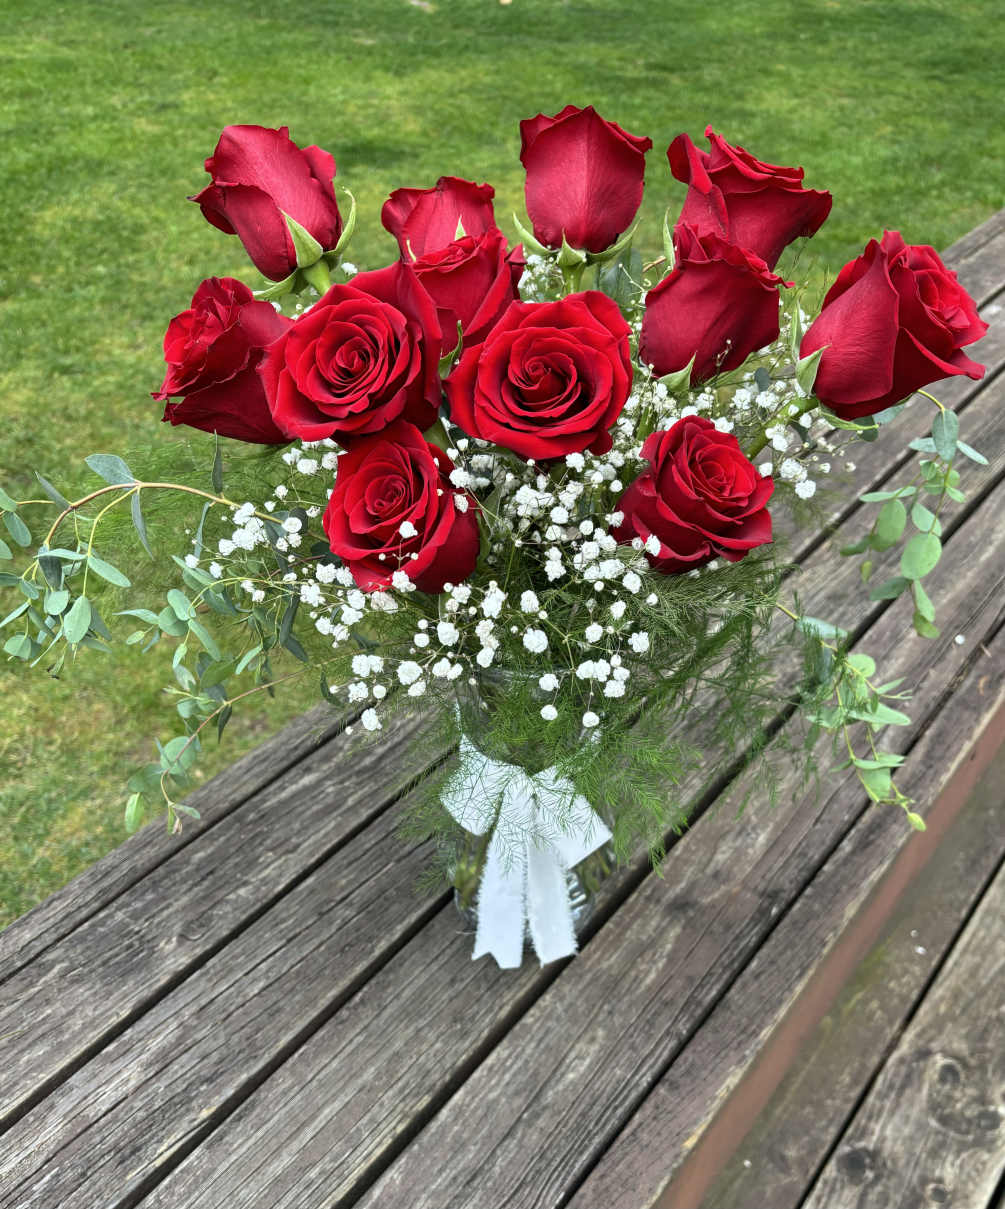 Dozen of Red Roses with added greens and filler.

